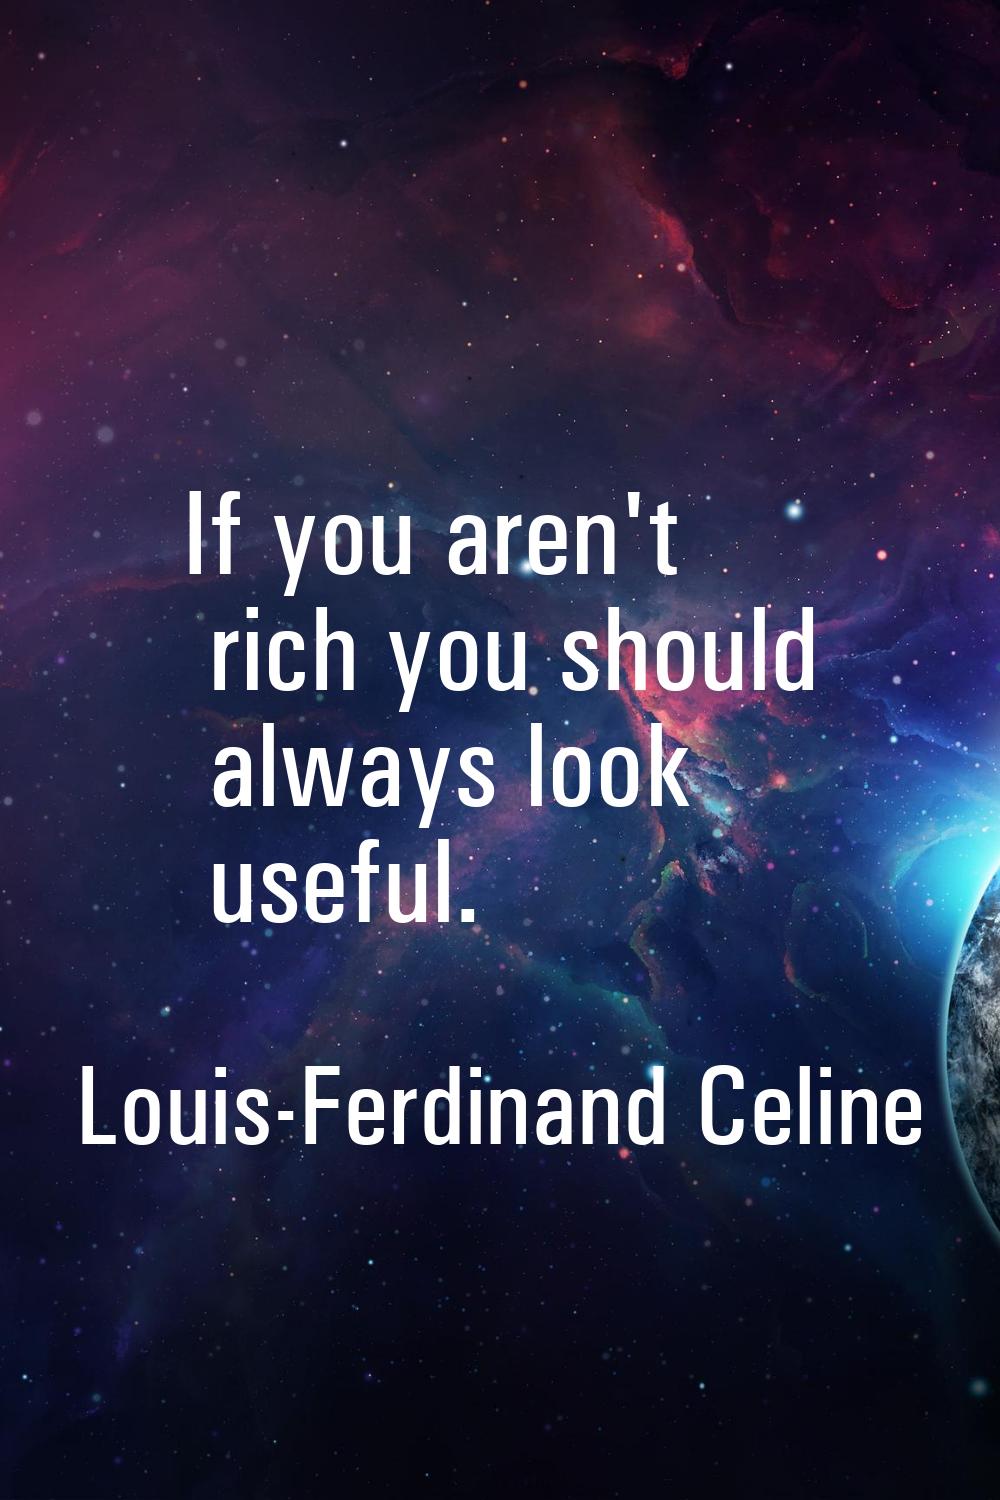 If you aren't rich you should always look useful.